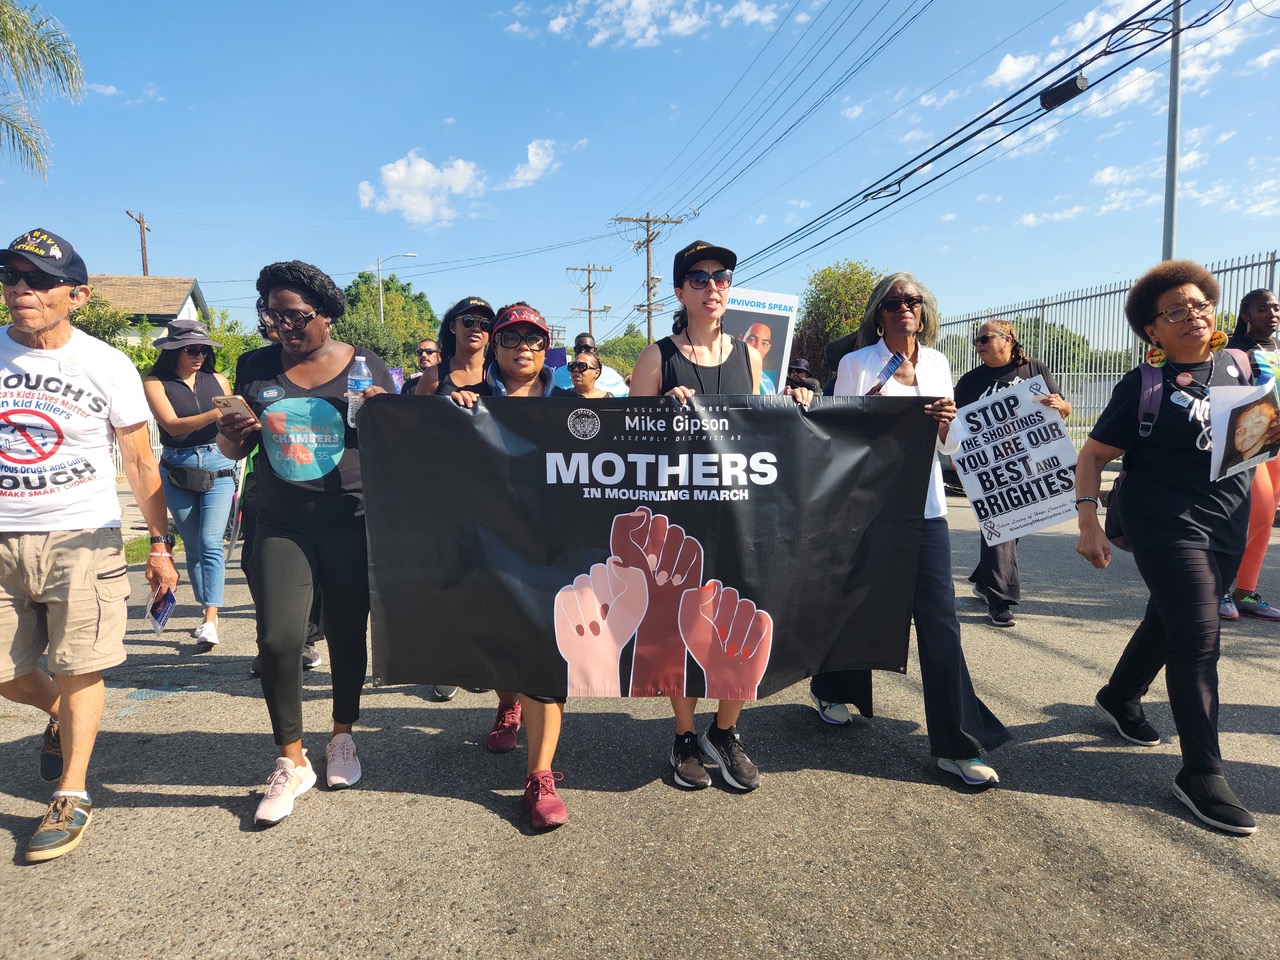 Mothers in Mourning: Moms, Allies Protest Gun Violence in California  